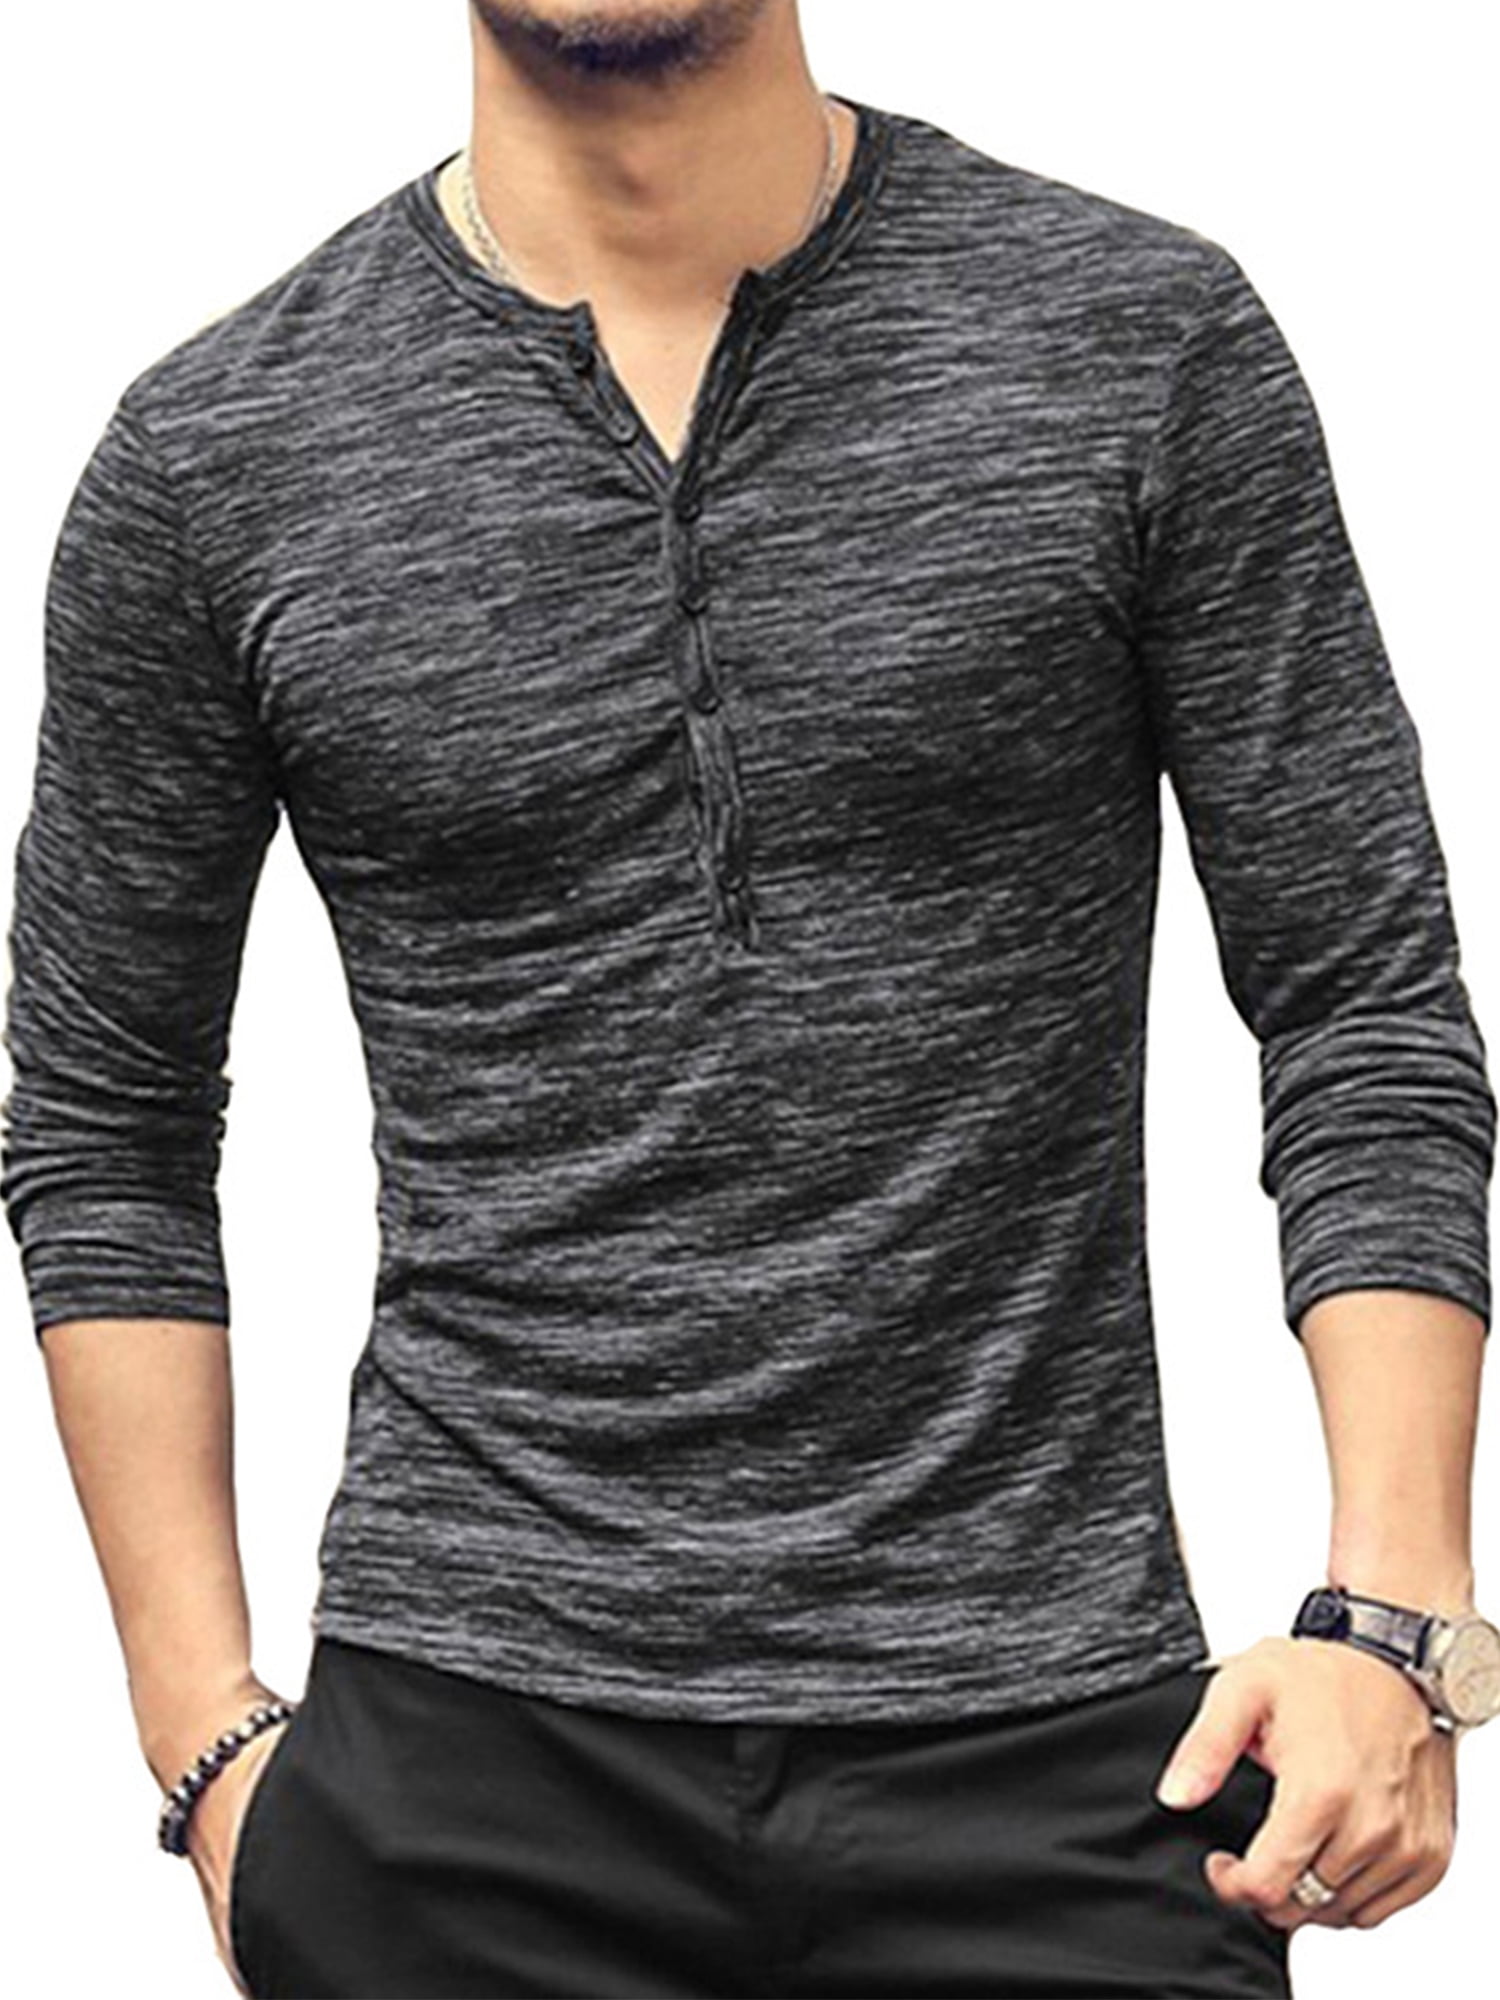 Mens Pullover Thin Slim Fit Tops High Neck Basic Long sleeve Base shirts Casual 